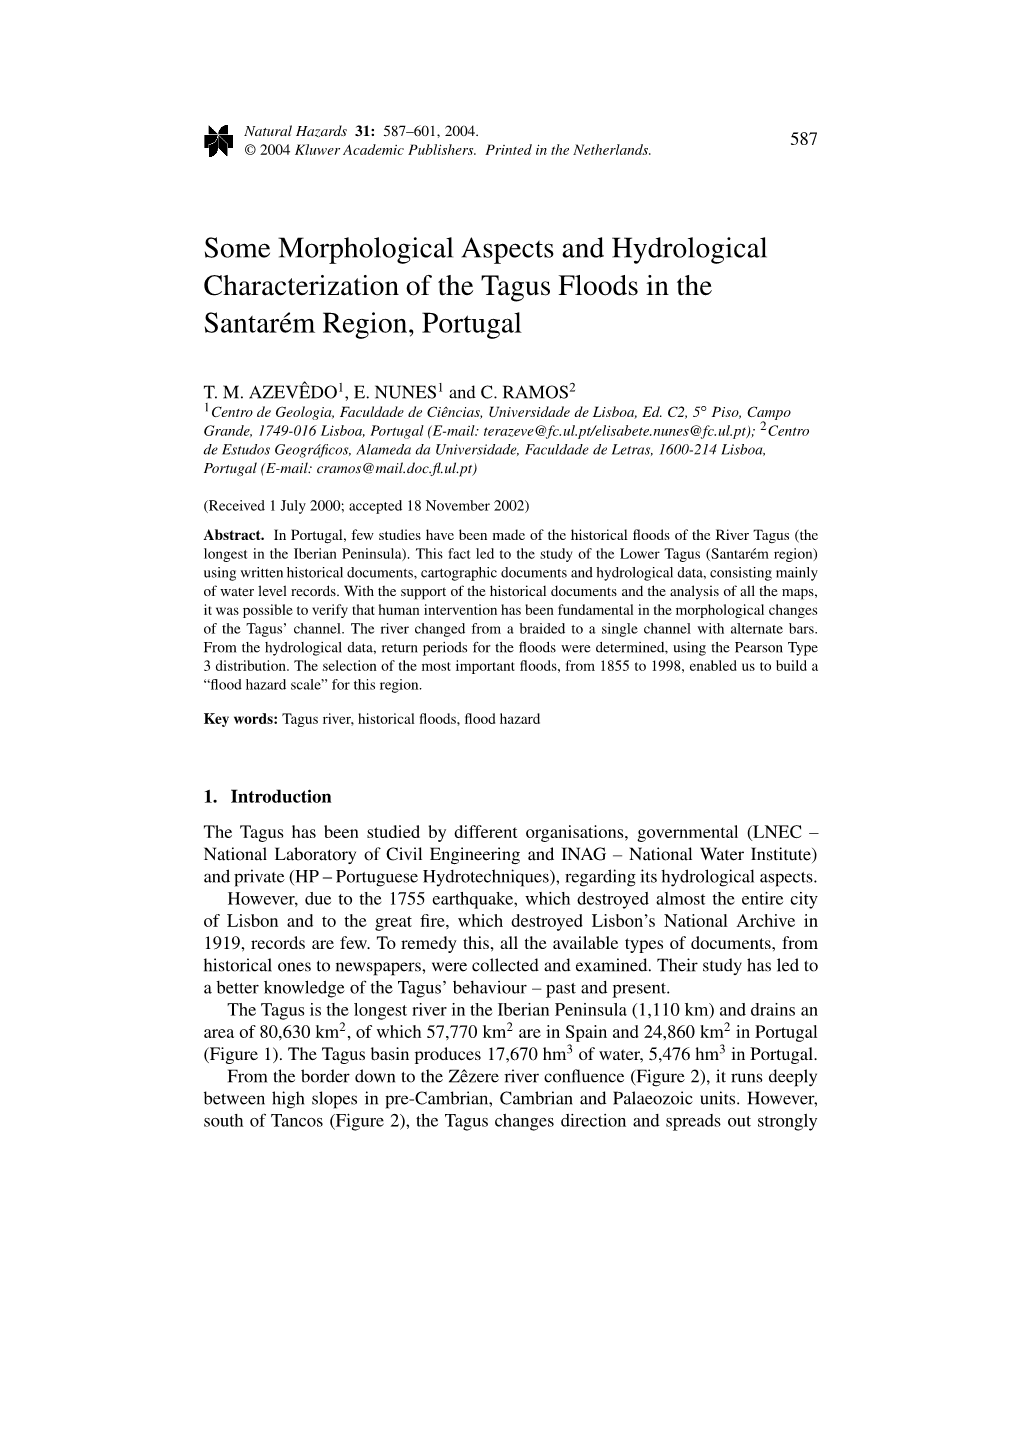 Some Morphological Aspects and Hydrological Characterization of the Tagus Floods in the Santarém Region, Portugal